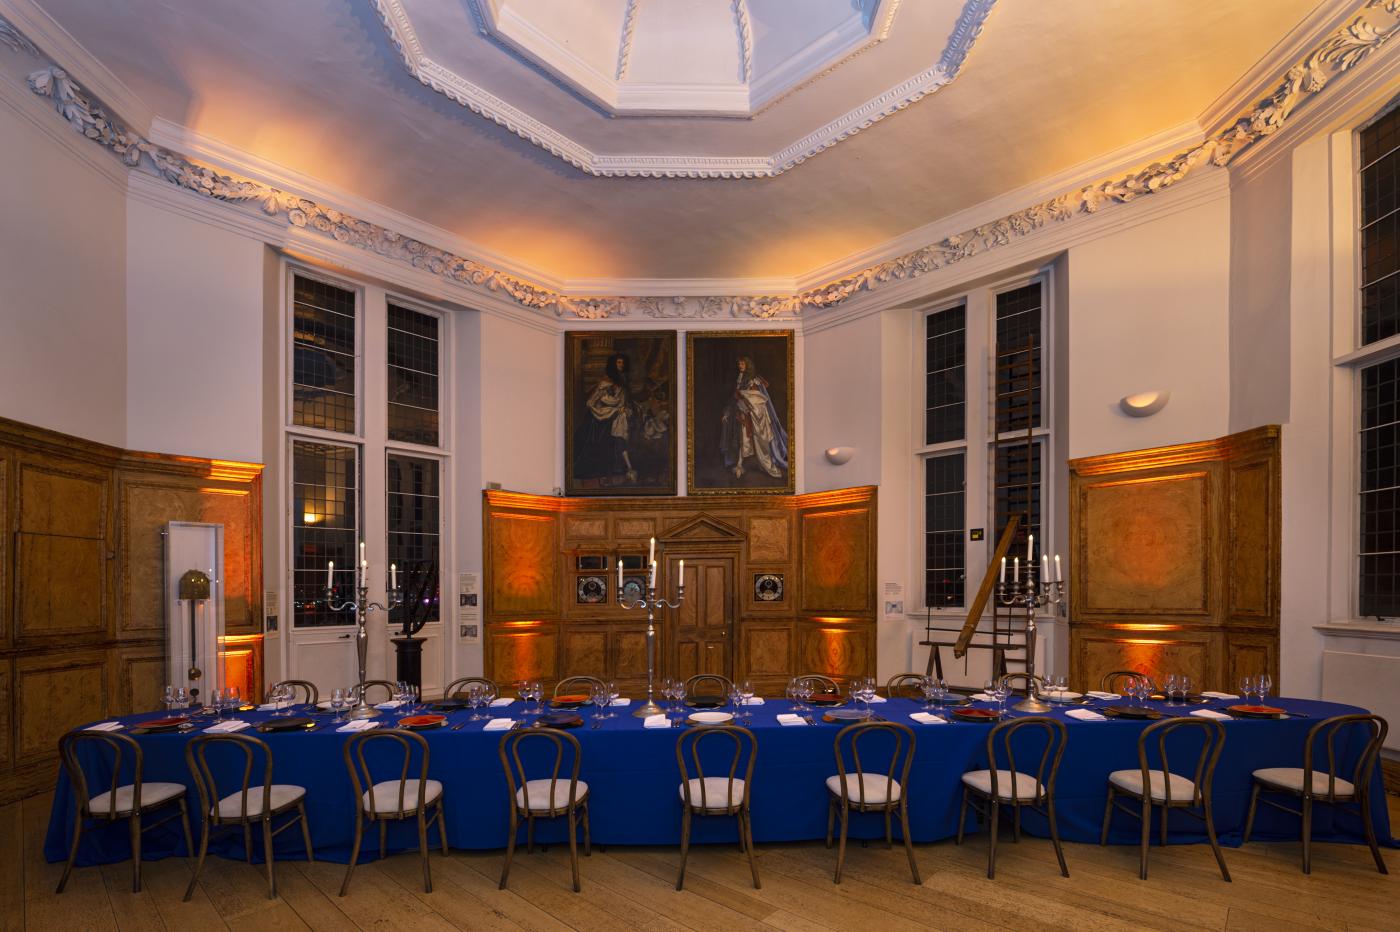 An image showing 'Dinner in Octagon Room'